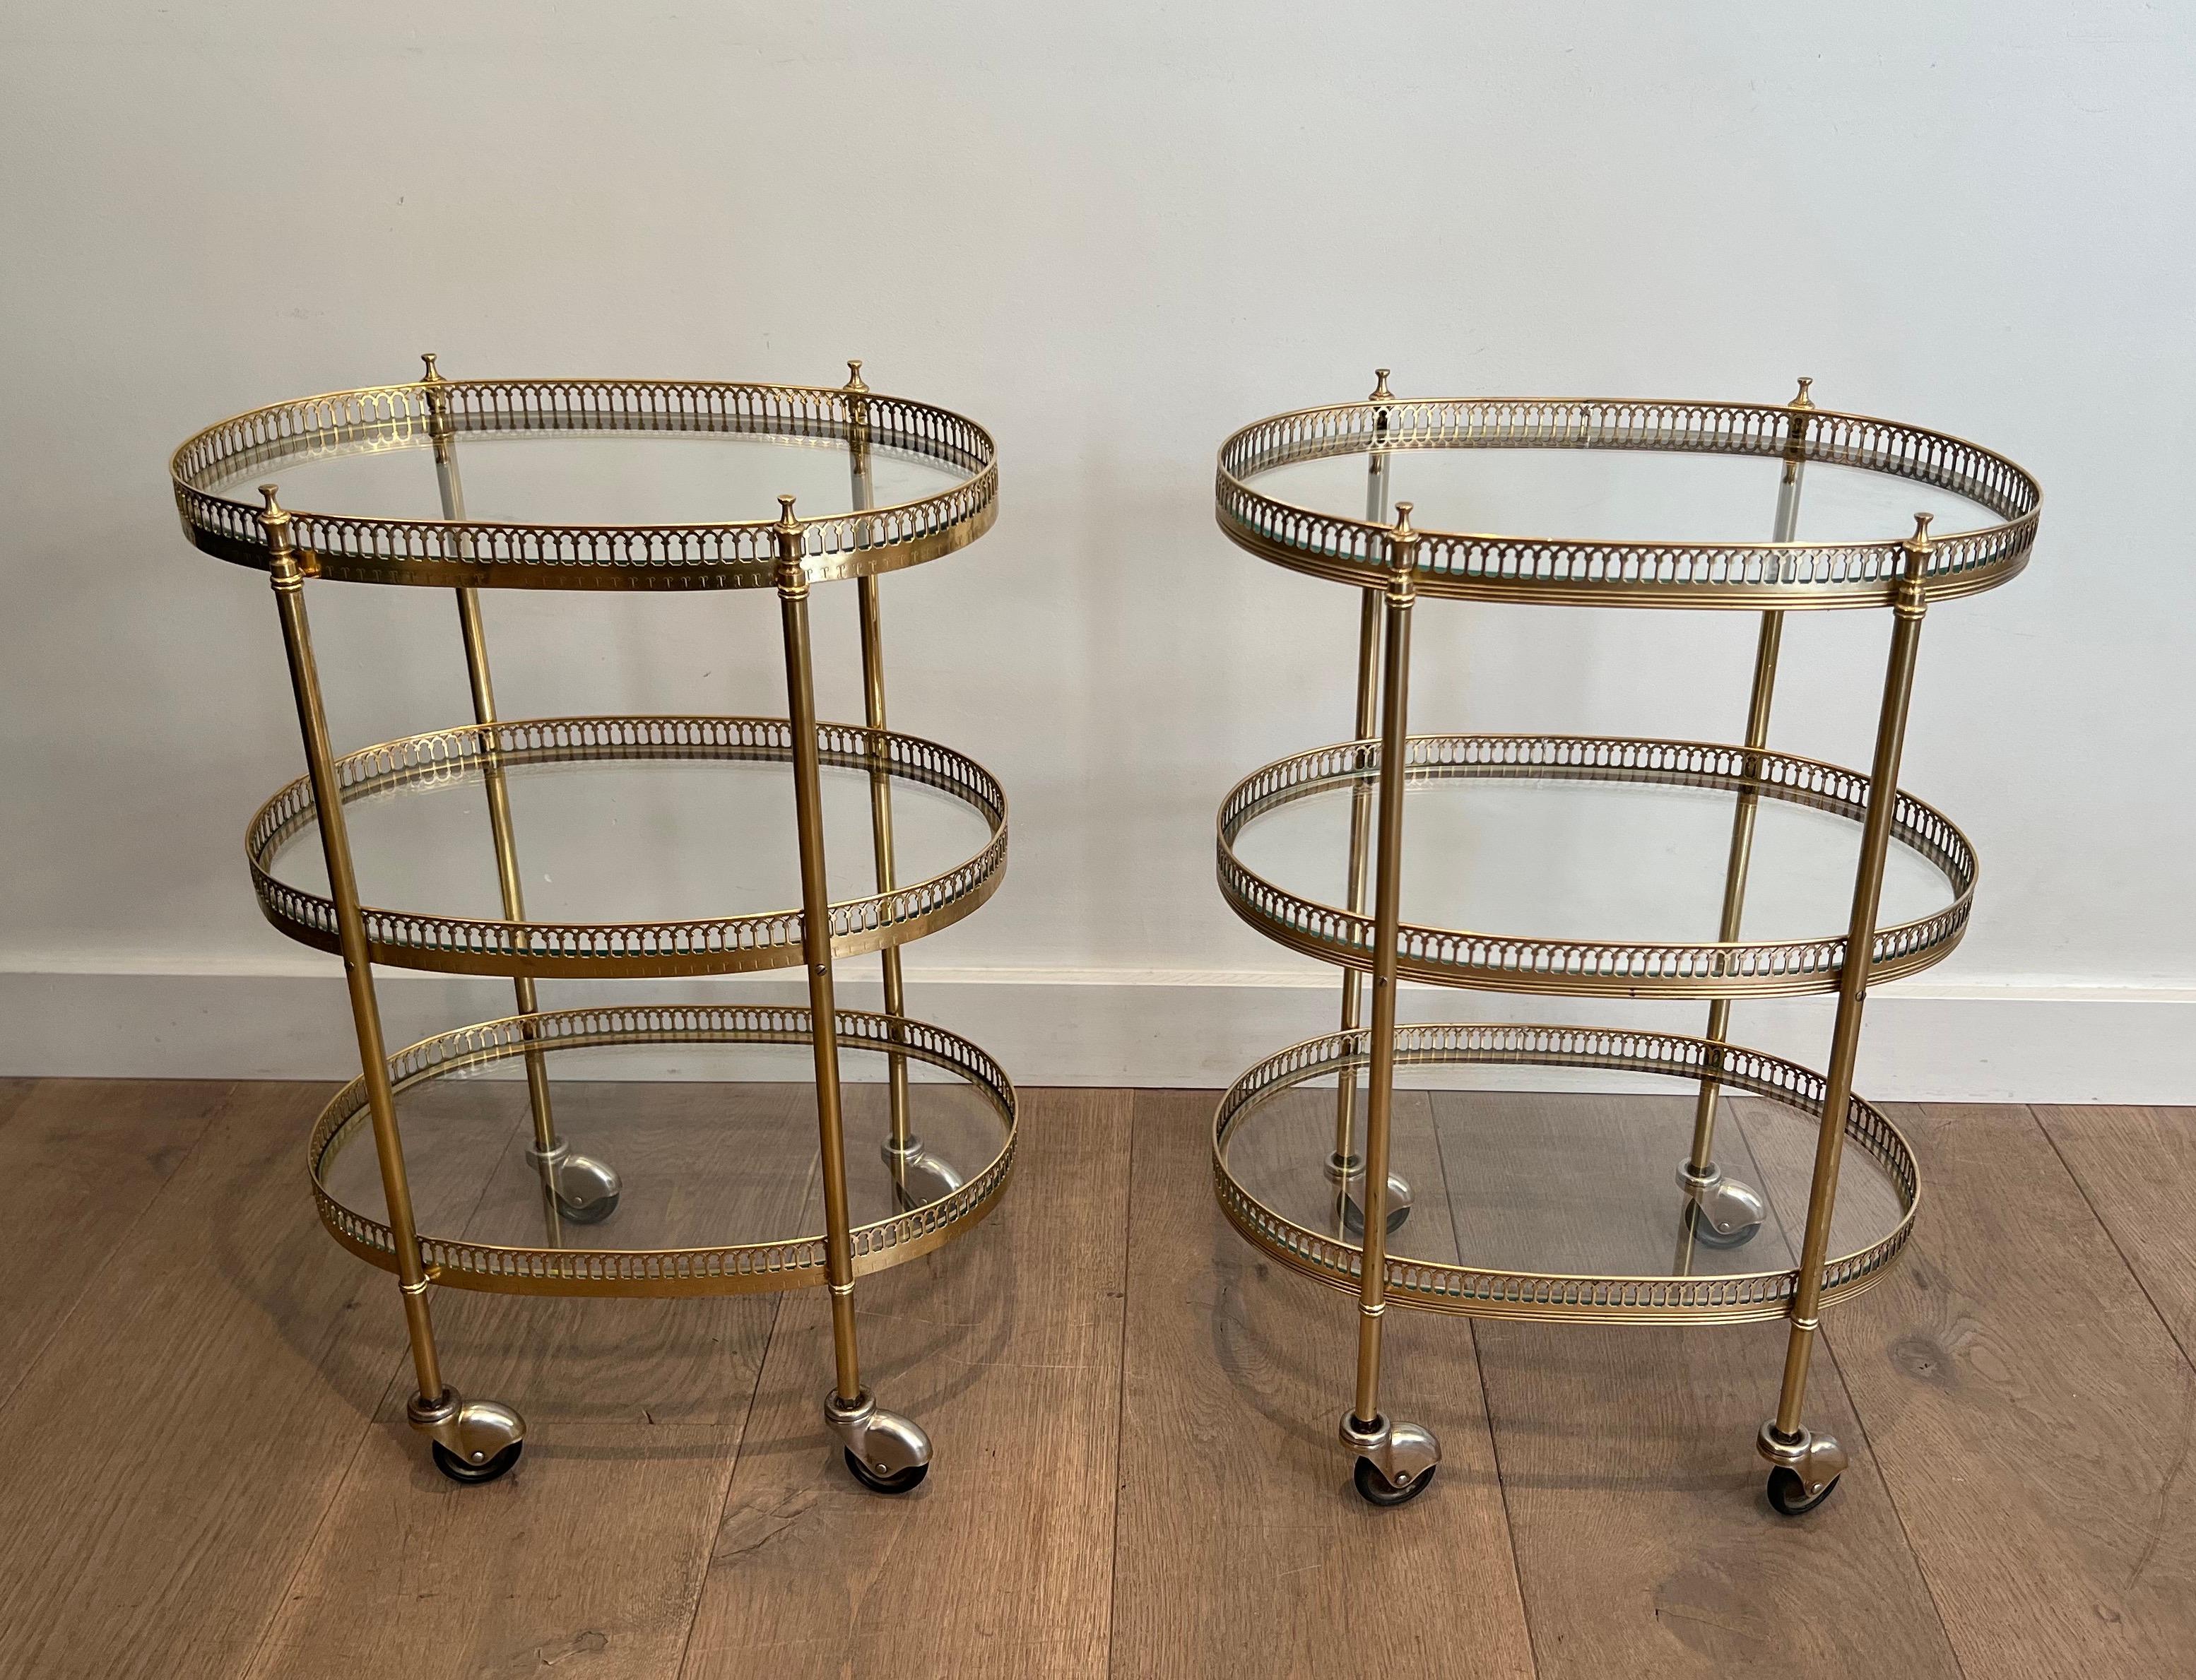 20th Century Pair of 3 Tiers Oval Brass Drinks Trolley in the Style of Maison Jansen